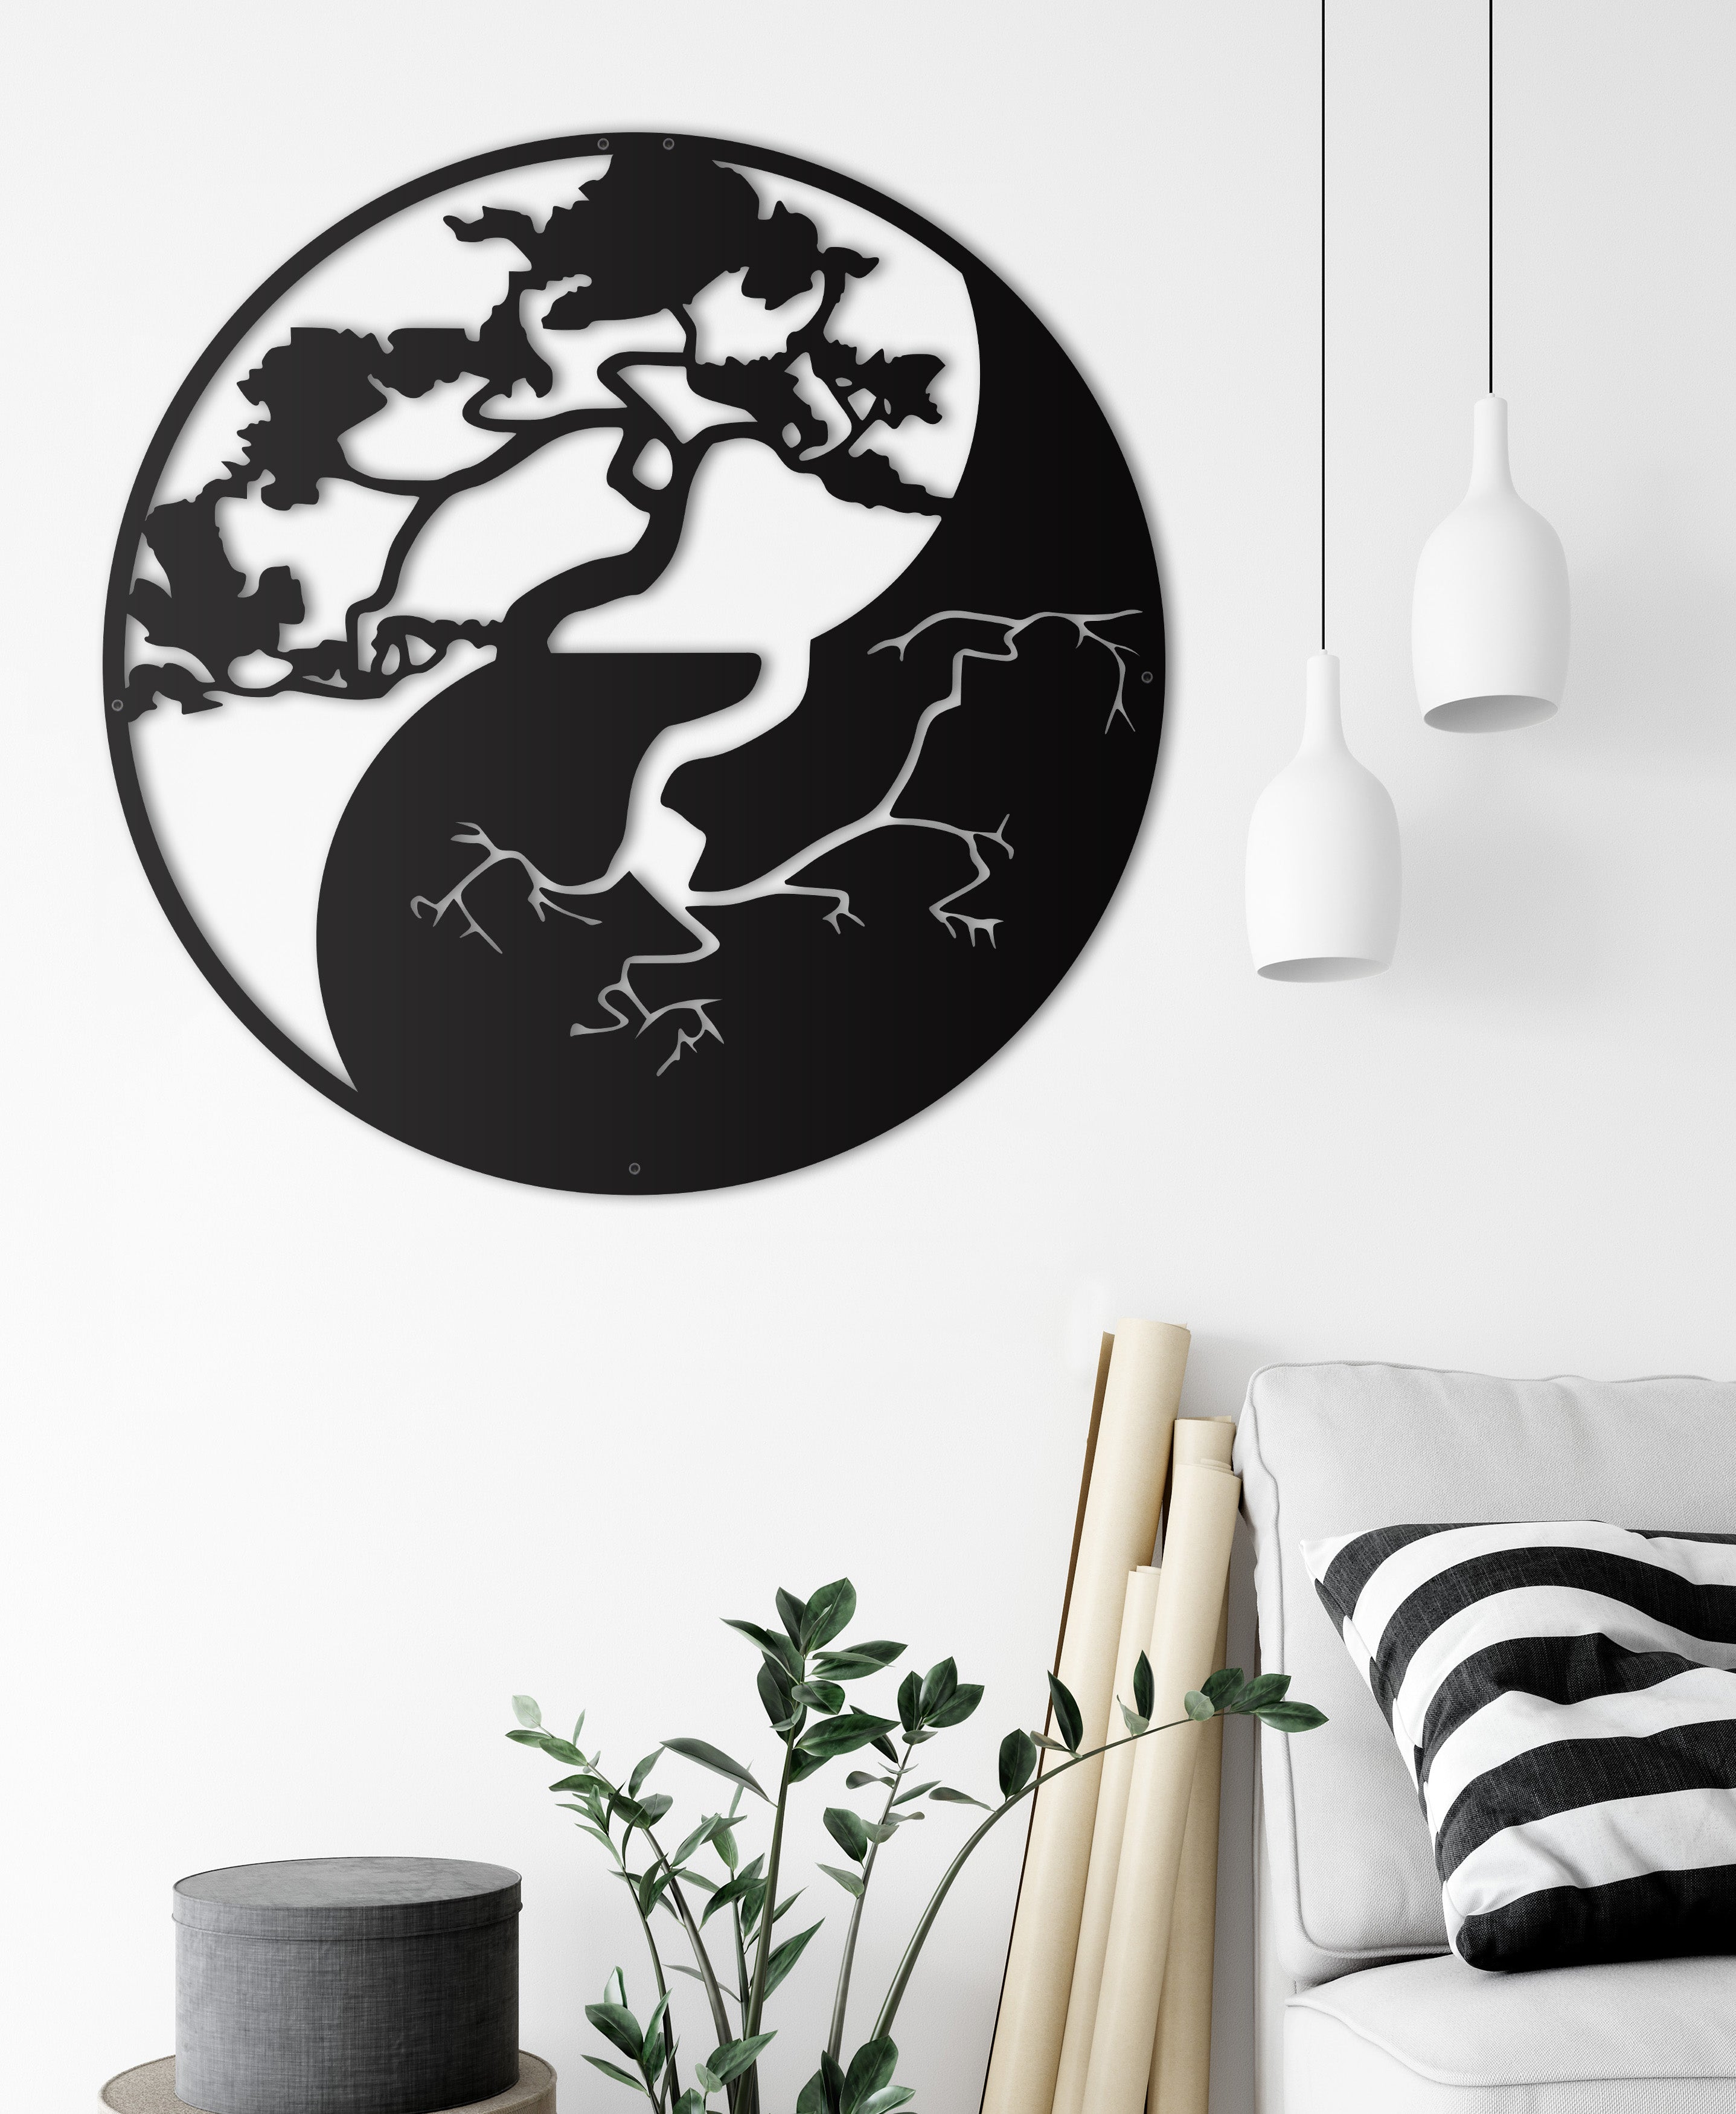 Unique Bonsai Tree Wall Decor/Aesthetic Modern Metal Wall Art/ Gift For Her New Home Gift House Black Living Room Wall Decor